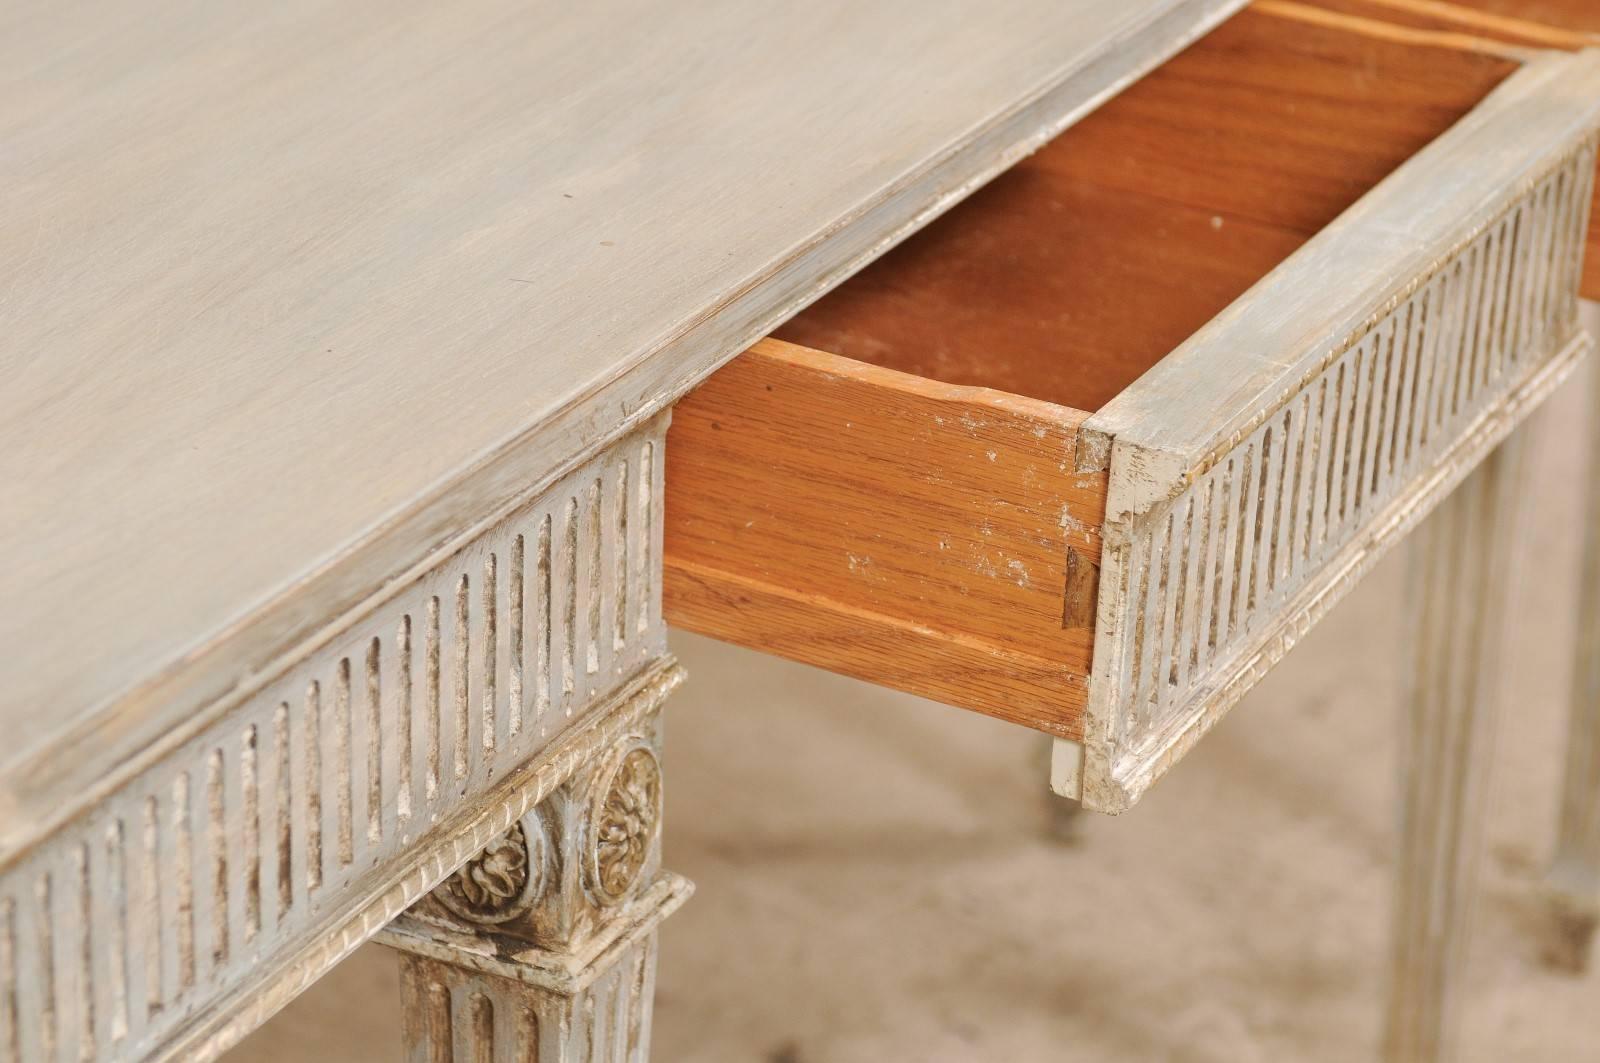 Gustavian Style Carved Wood Console Table with Fluting Detail & Discreet Drawers 2